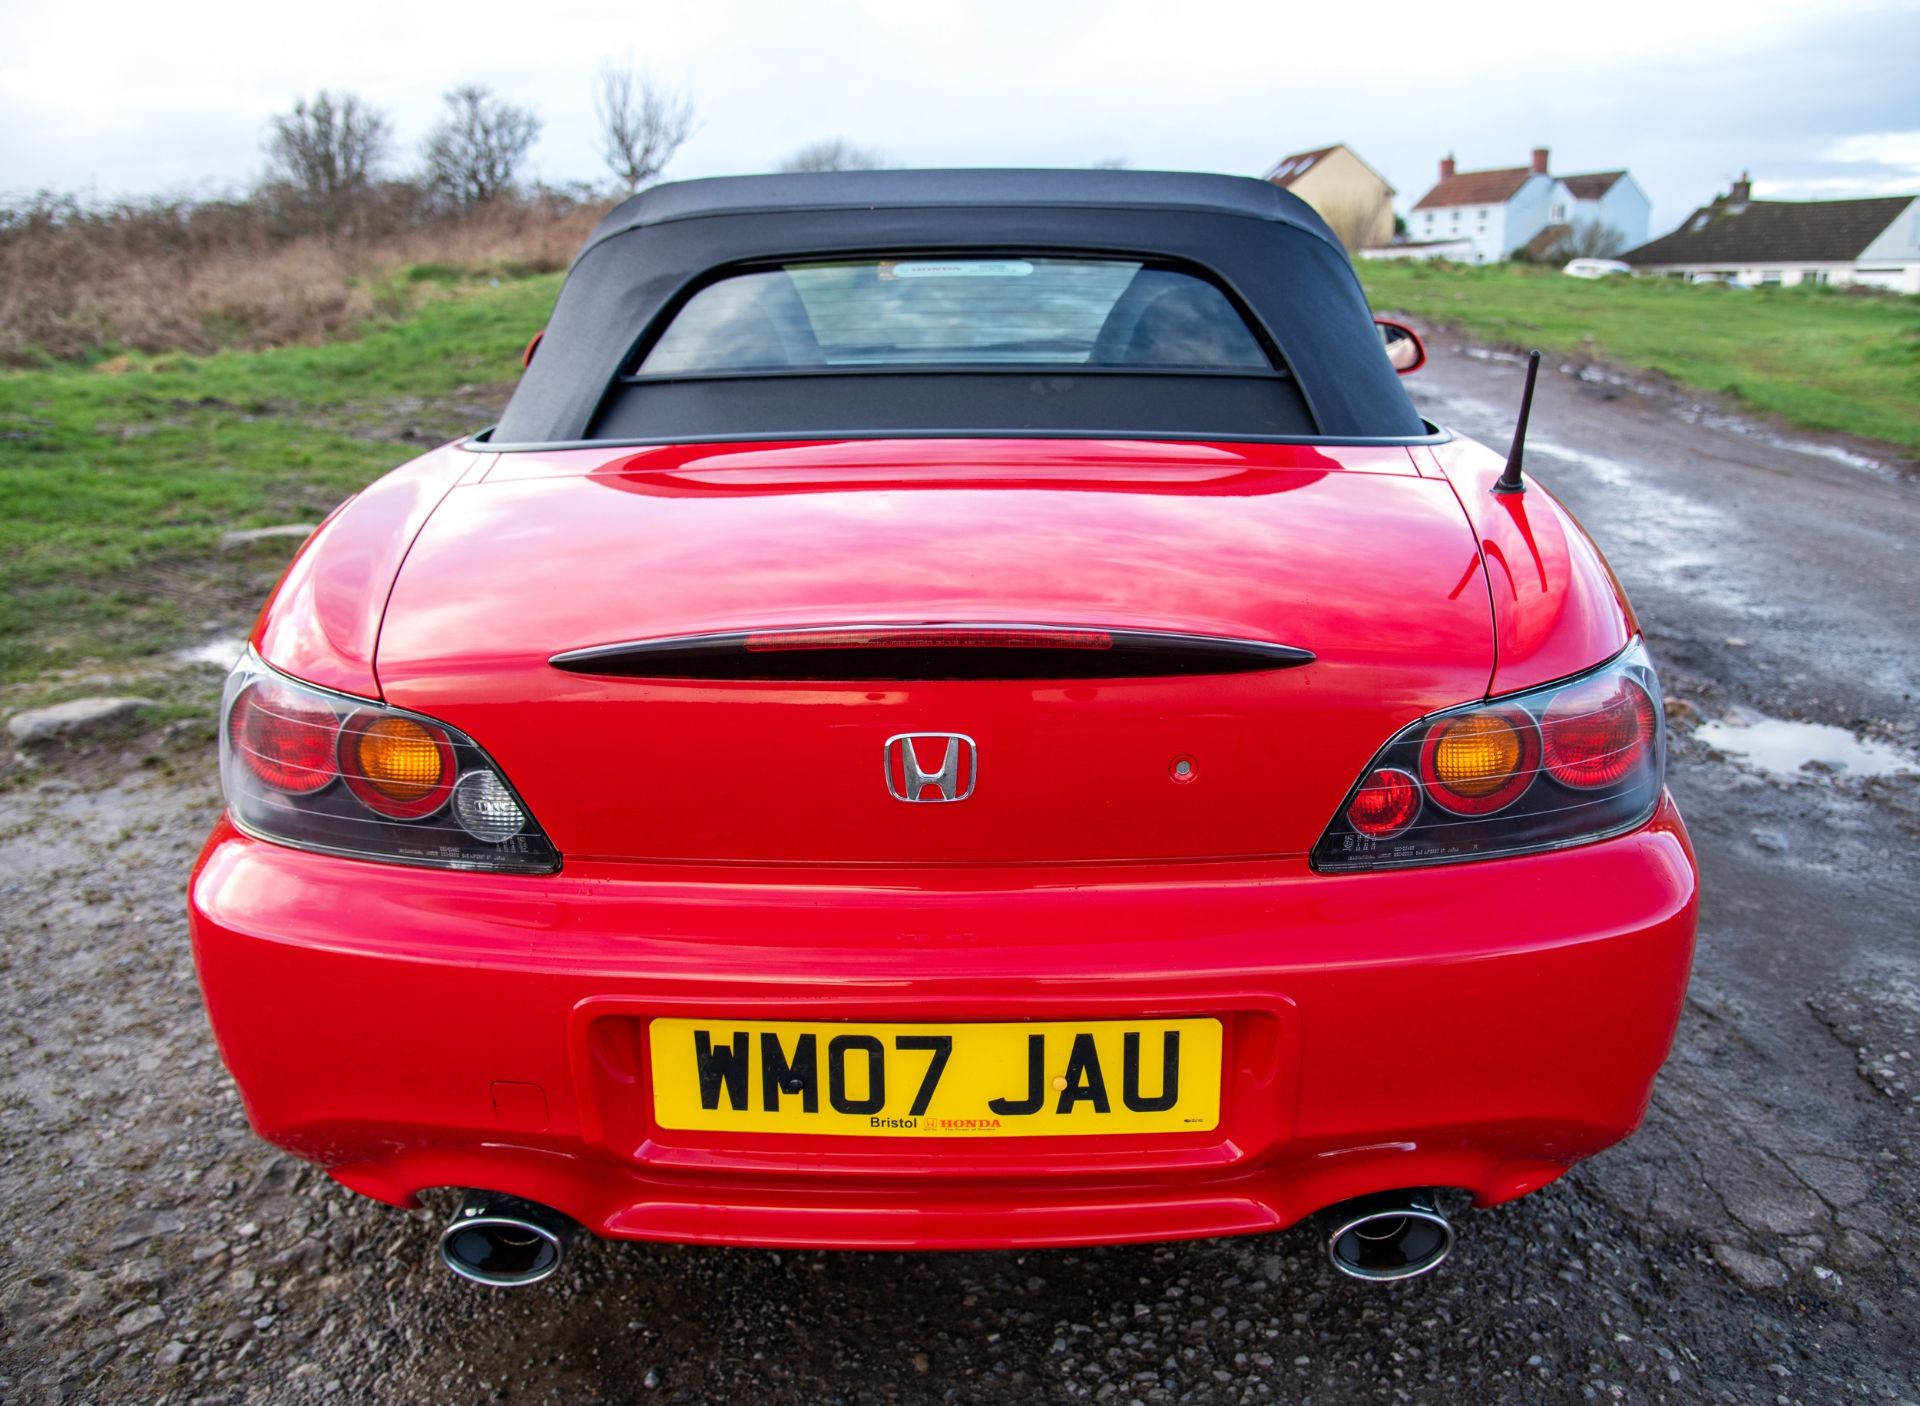 2007 HONDA S2000 Registration Number: WM07 JAU Chassis Number: JHMAP11207S200009 Recorded Mileage: - Image 21 of 26